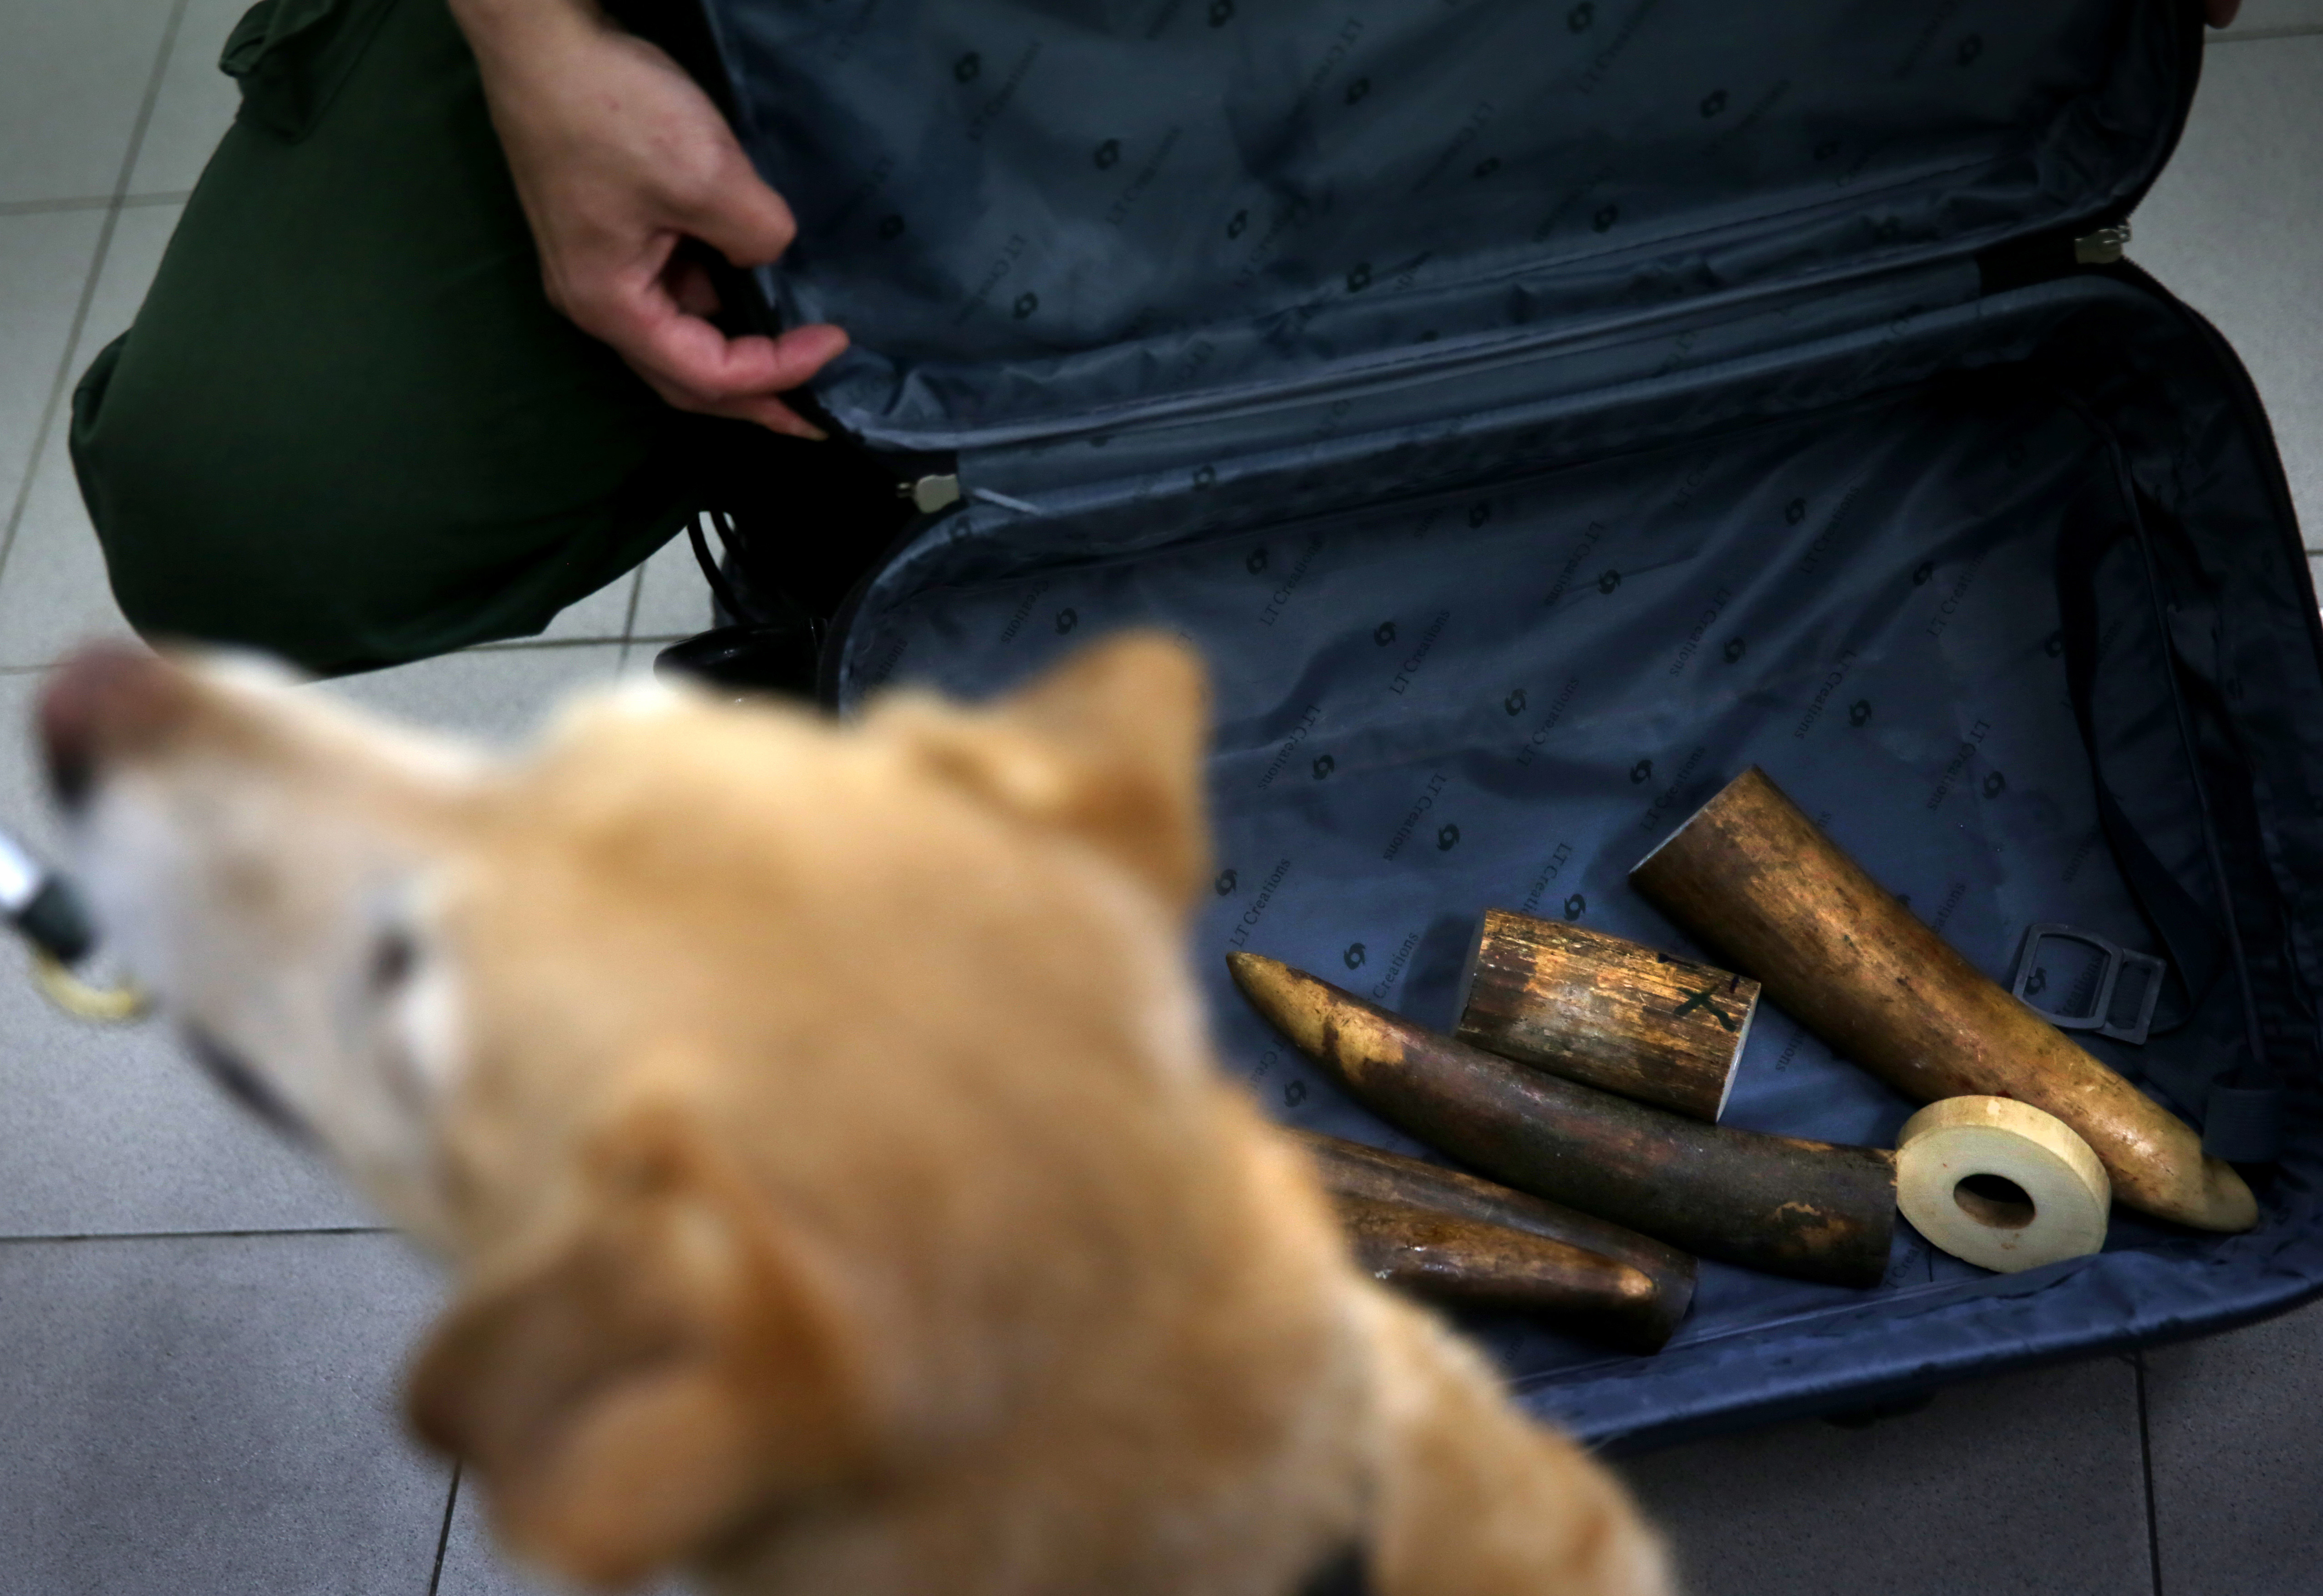 FILES: Rosie, a sniffer dog in service with Hong Kong's Agriculture, Fisheries and Conservation Department (AFCD), waits for a treat as a reward during an ivory detection training run in Ping Che district of the New Territories in Hong Kong on January 28, 2016. The AFCD provided access to the Hong Kong media to demonstrate how detector dogs are used to combat the trade in smuggled animals and animal products. Hong Kong is considered a major transit hub for the world Ivory trade. AFP PHOTO